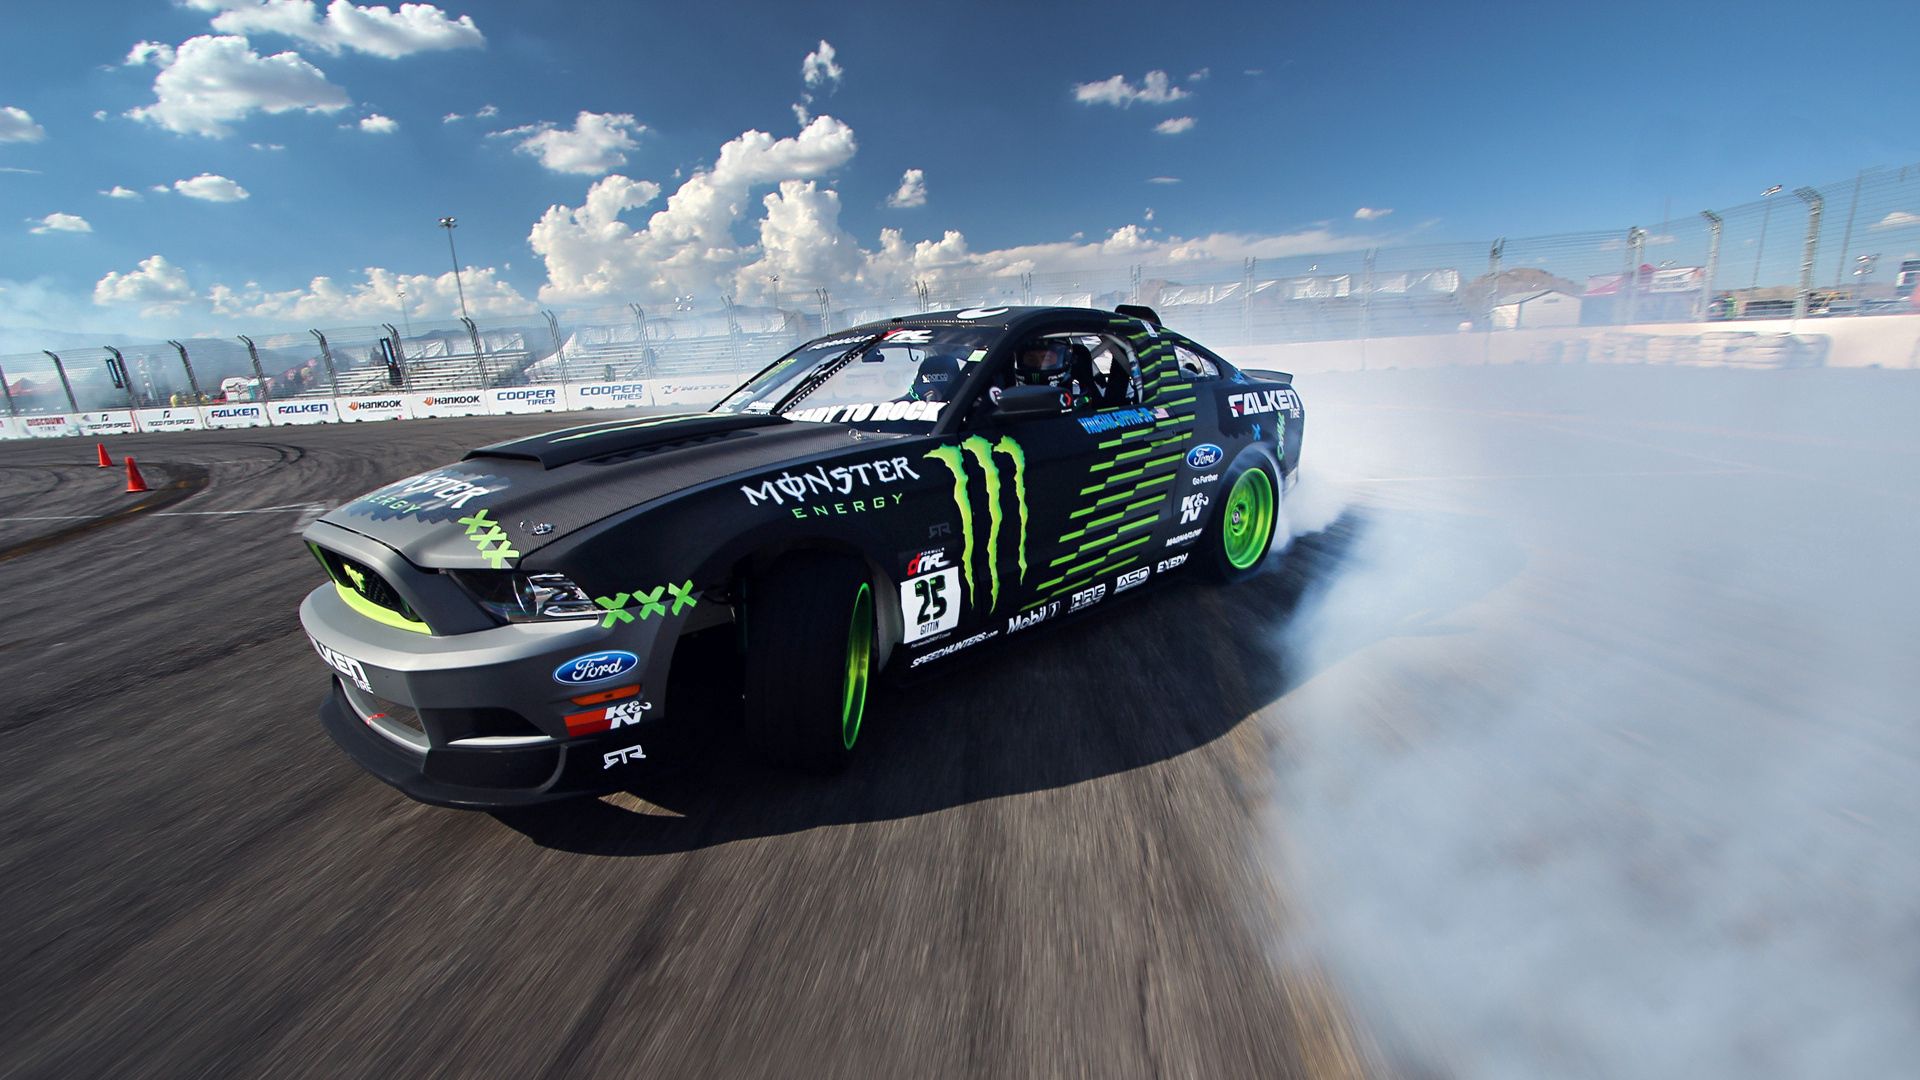 mustang, drift, smoke, sports, clouds, ford, sports car, gt, drifting, competition